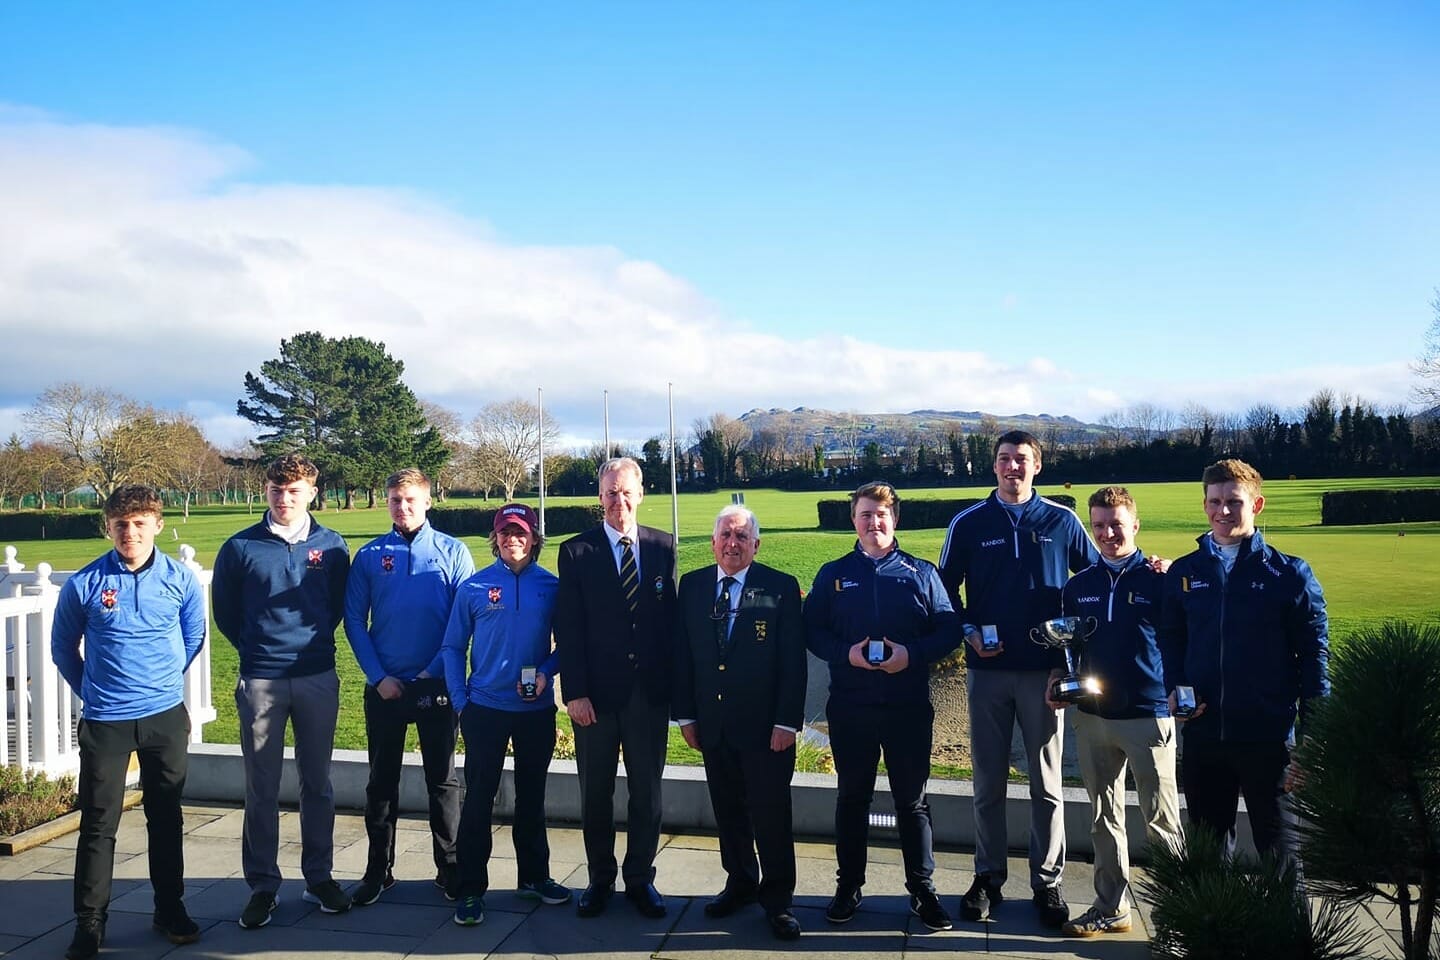 Ulster University crowned Irish Colleges Match Play champions after win at Woodbrook Golf Club